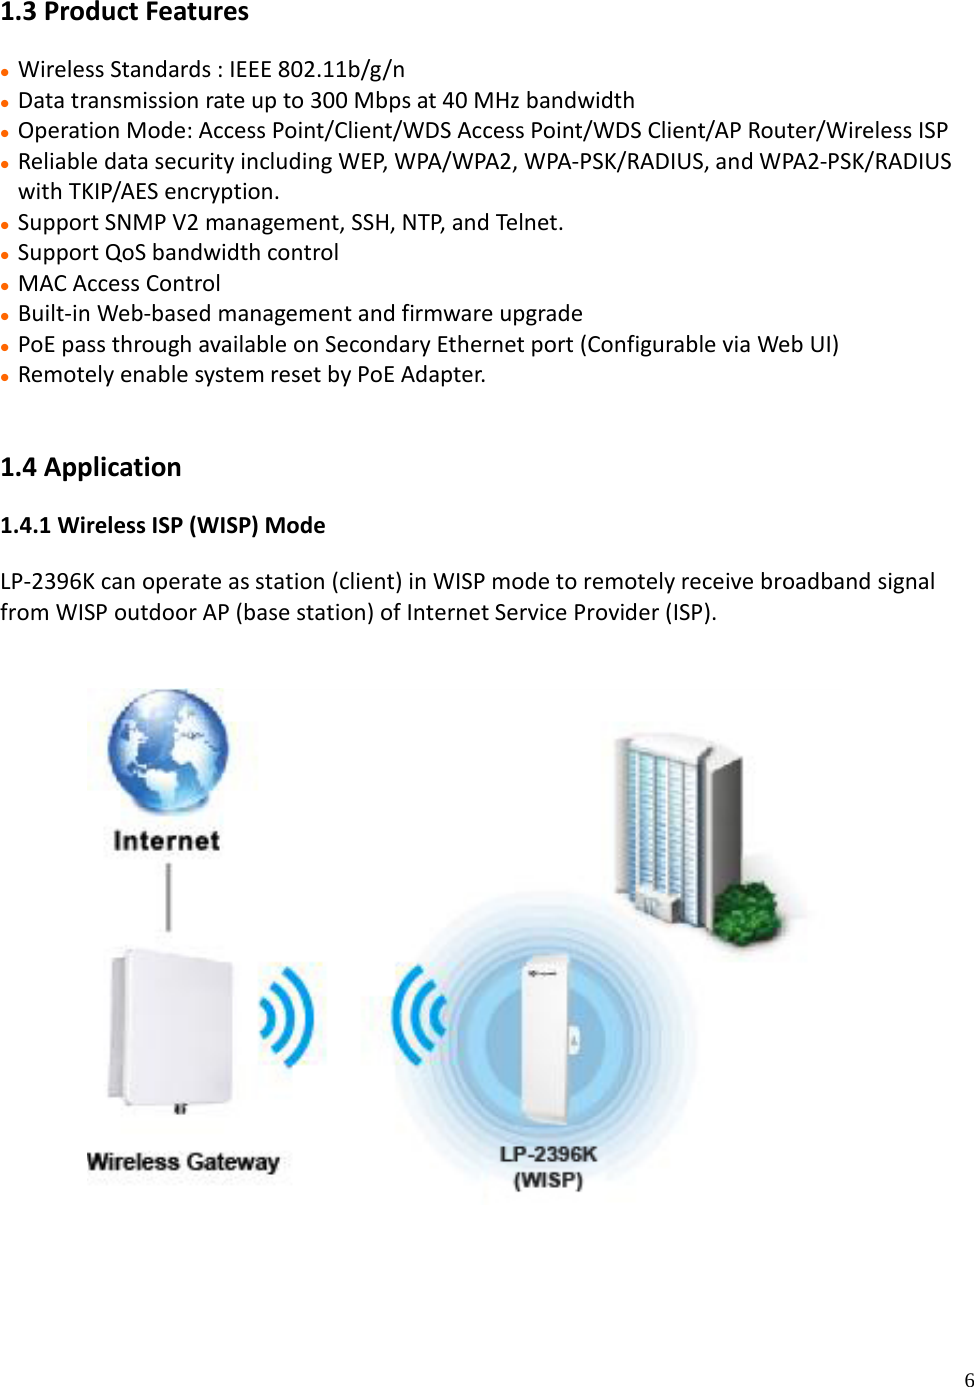 6 1.3 Product Features Wireless Standards : IEEE 802.11b/g/n Data transmission rate up to 300 Mbps at 40 MHz bandwidth Operation Mode: Access Point/Client/WDS Access Point/WDS Client/AP Router/Wireless ISP Reliable data security including WEP, WPA/WPA2, WPA-PSK/RADIUS, and WPA2-PSK/RADIUSwith TKIP/AES encryption. Support SNMP V2 management, SSH, NTP, and Telnet. Support QoS bandwidth control MAC Access Control Built-in Web-based management and firmware upgrade PoE pass through available on Secondary Ethernet port (Configurable via Web UI) Remotely enable system reset by PoE Adapter.1.4 Application 1.4.1 Wireless ISP (WISP) Mode LP-2396K can operate as station (client) in WISP mode to remotely receive broadband signal from WISP outdoor AP (base station) of Internet Service Provider (ISP).  